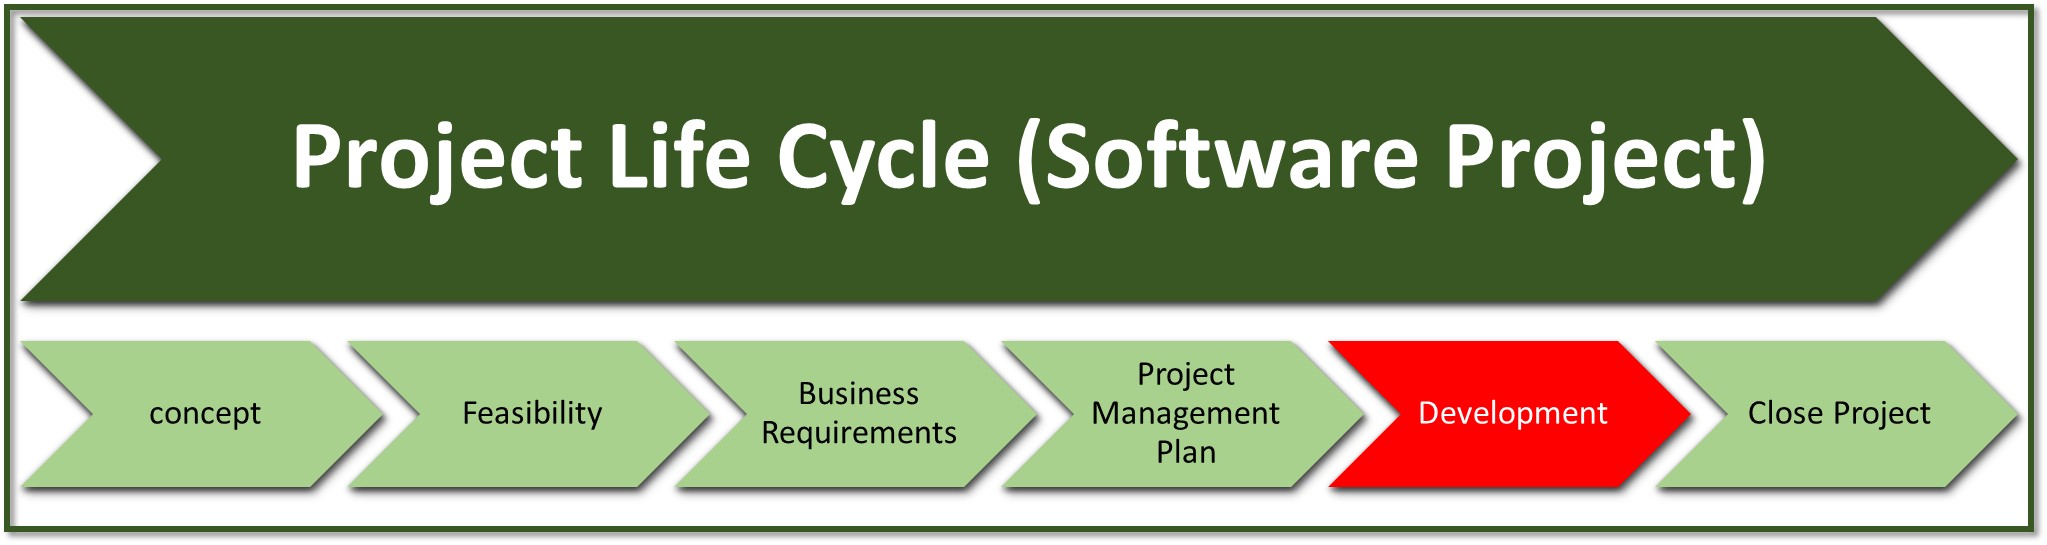 Is this a software project or a business project?